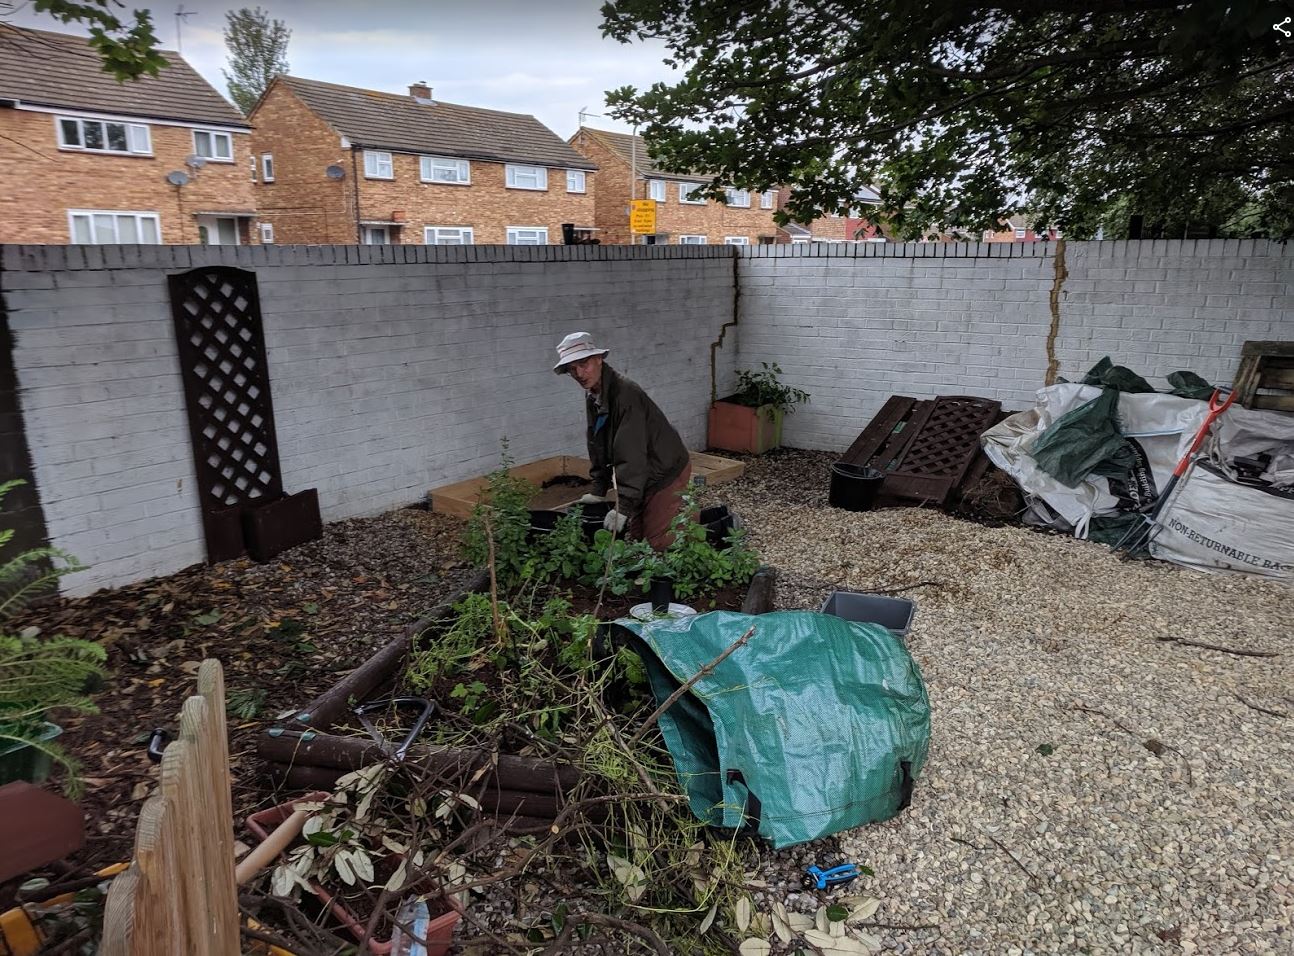 The left side of the Daisychain Family Centre garden - Our volunteers at work